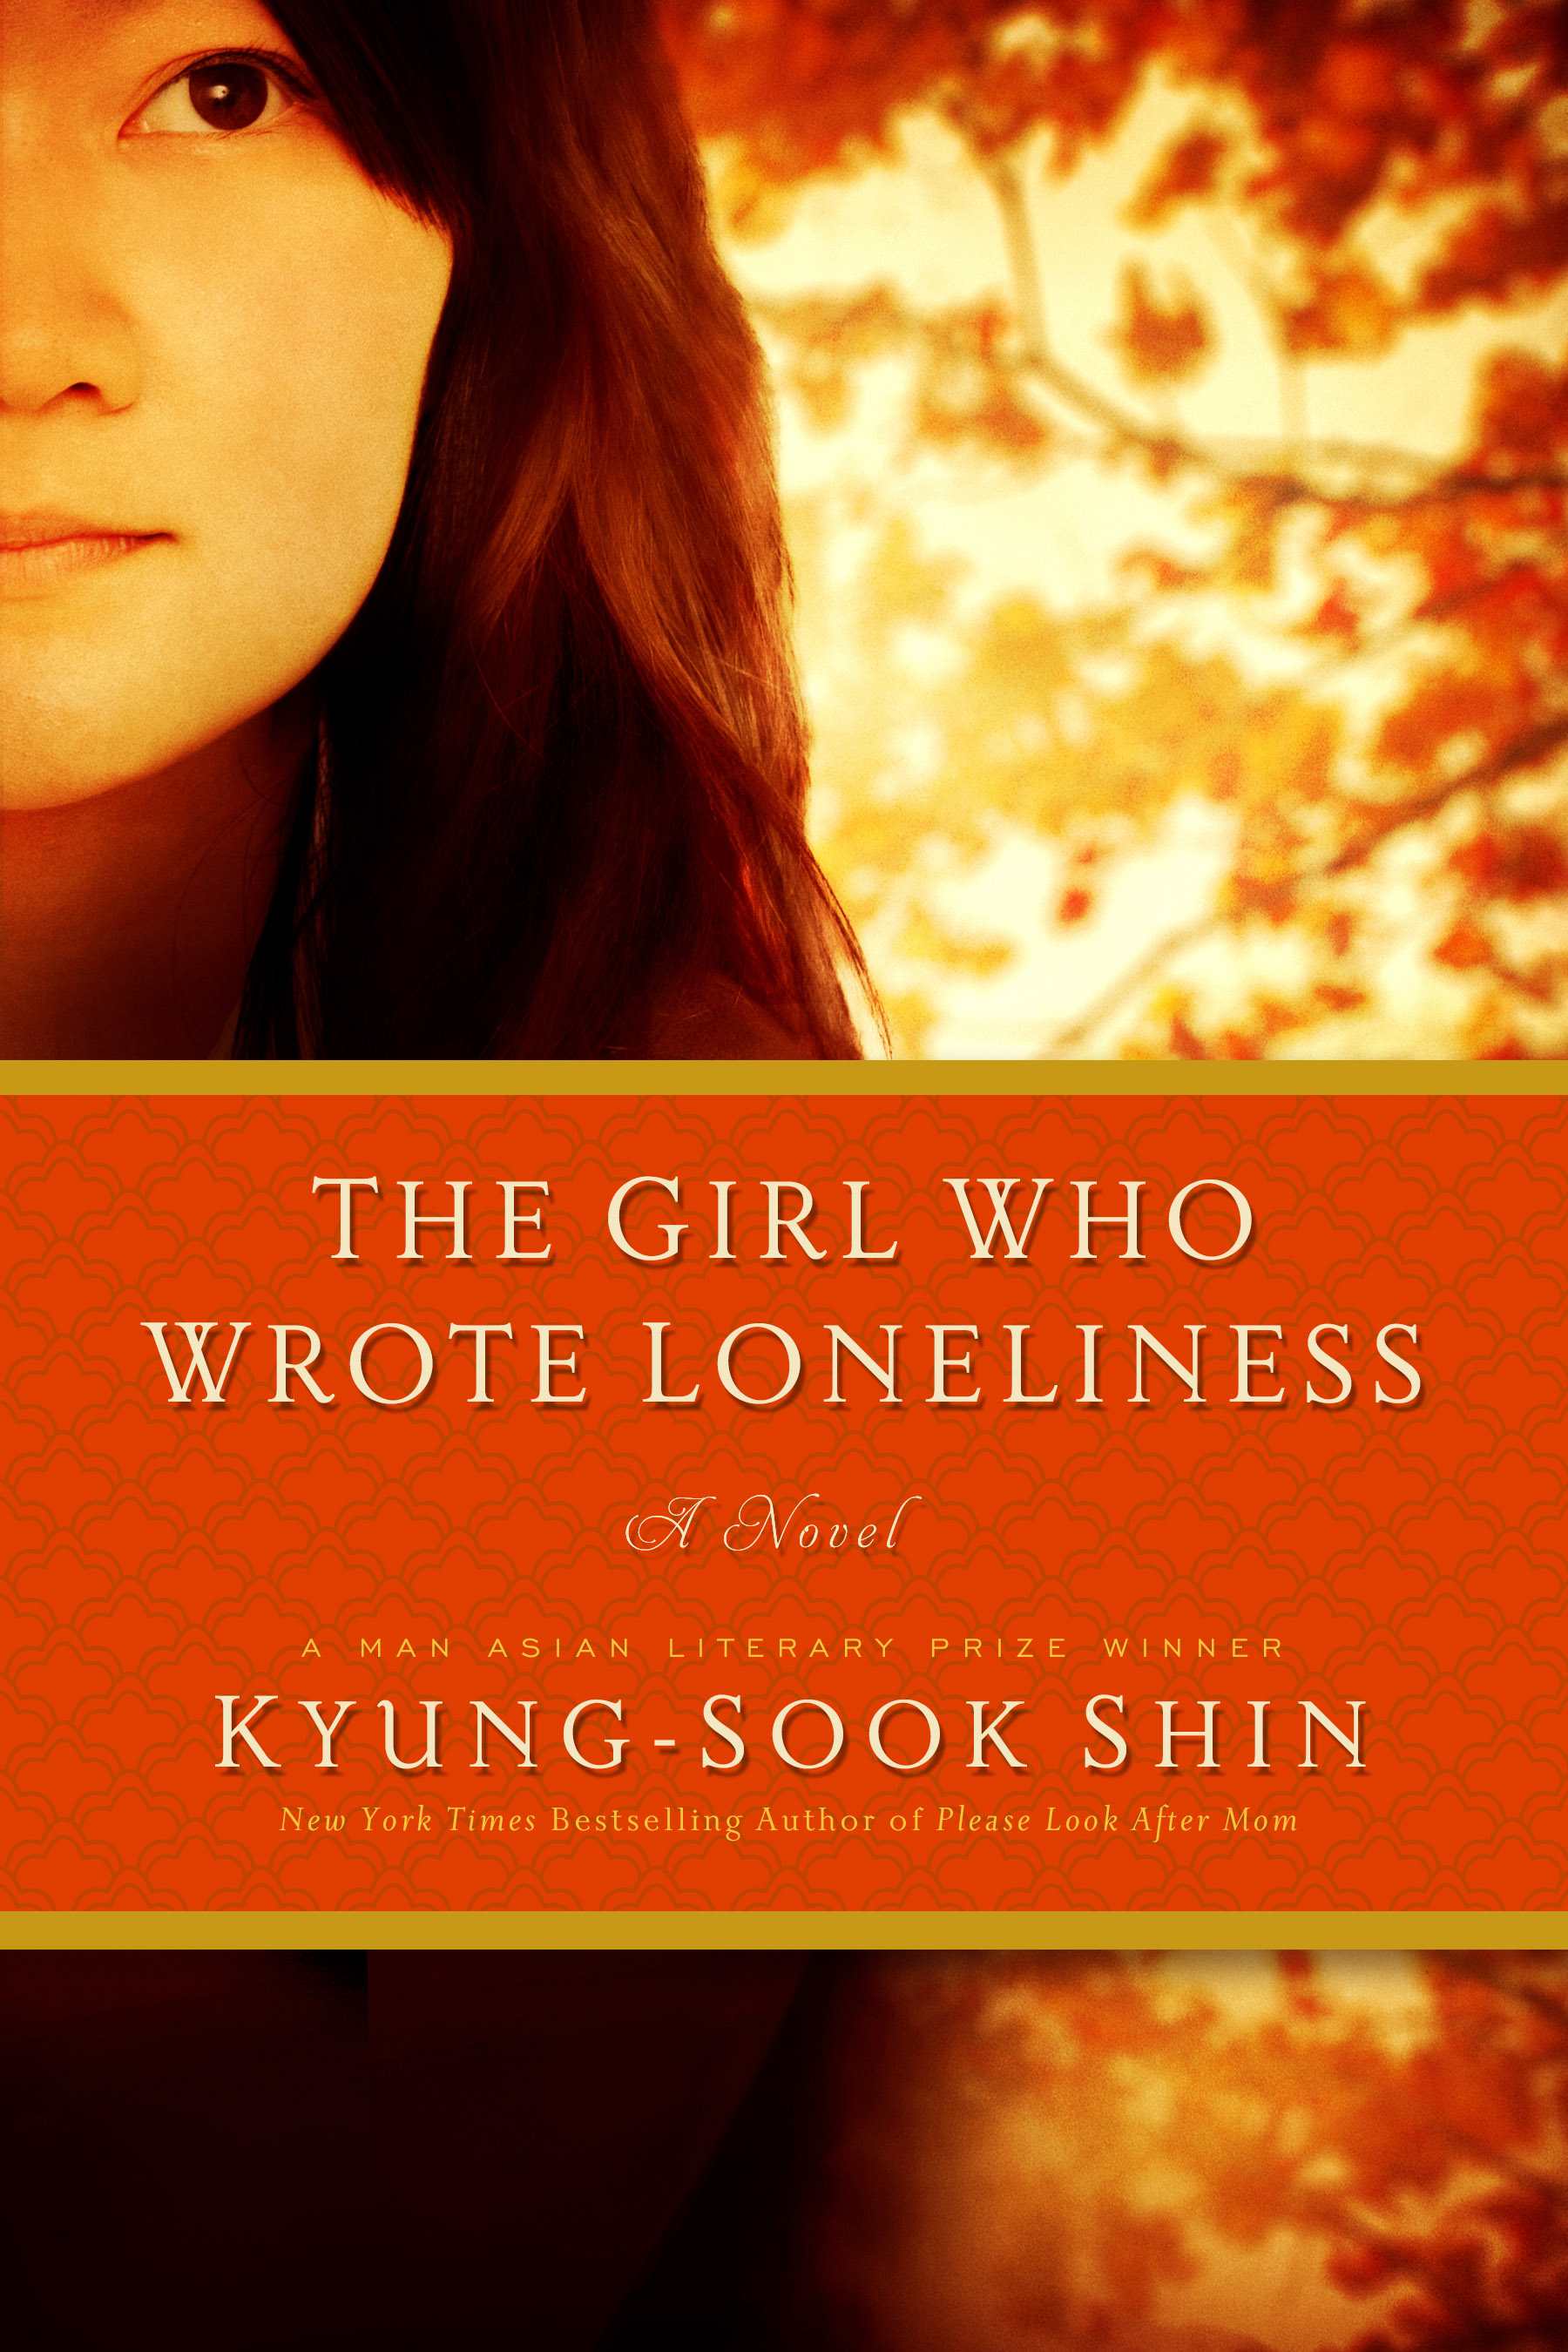 The Girl Who Wrote Loneliness-ADa.jpg